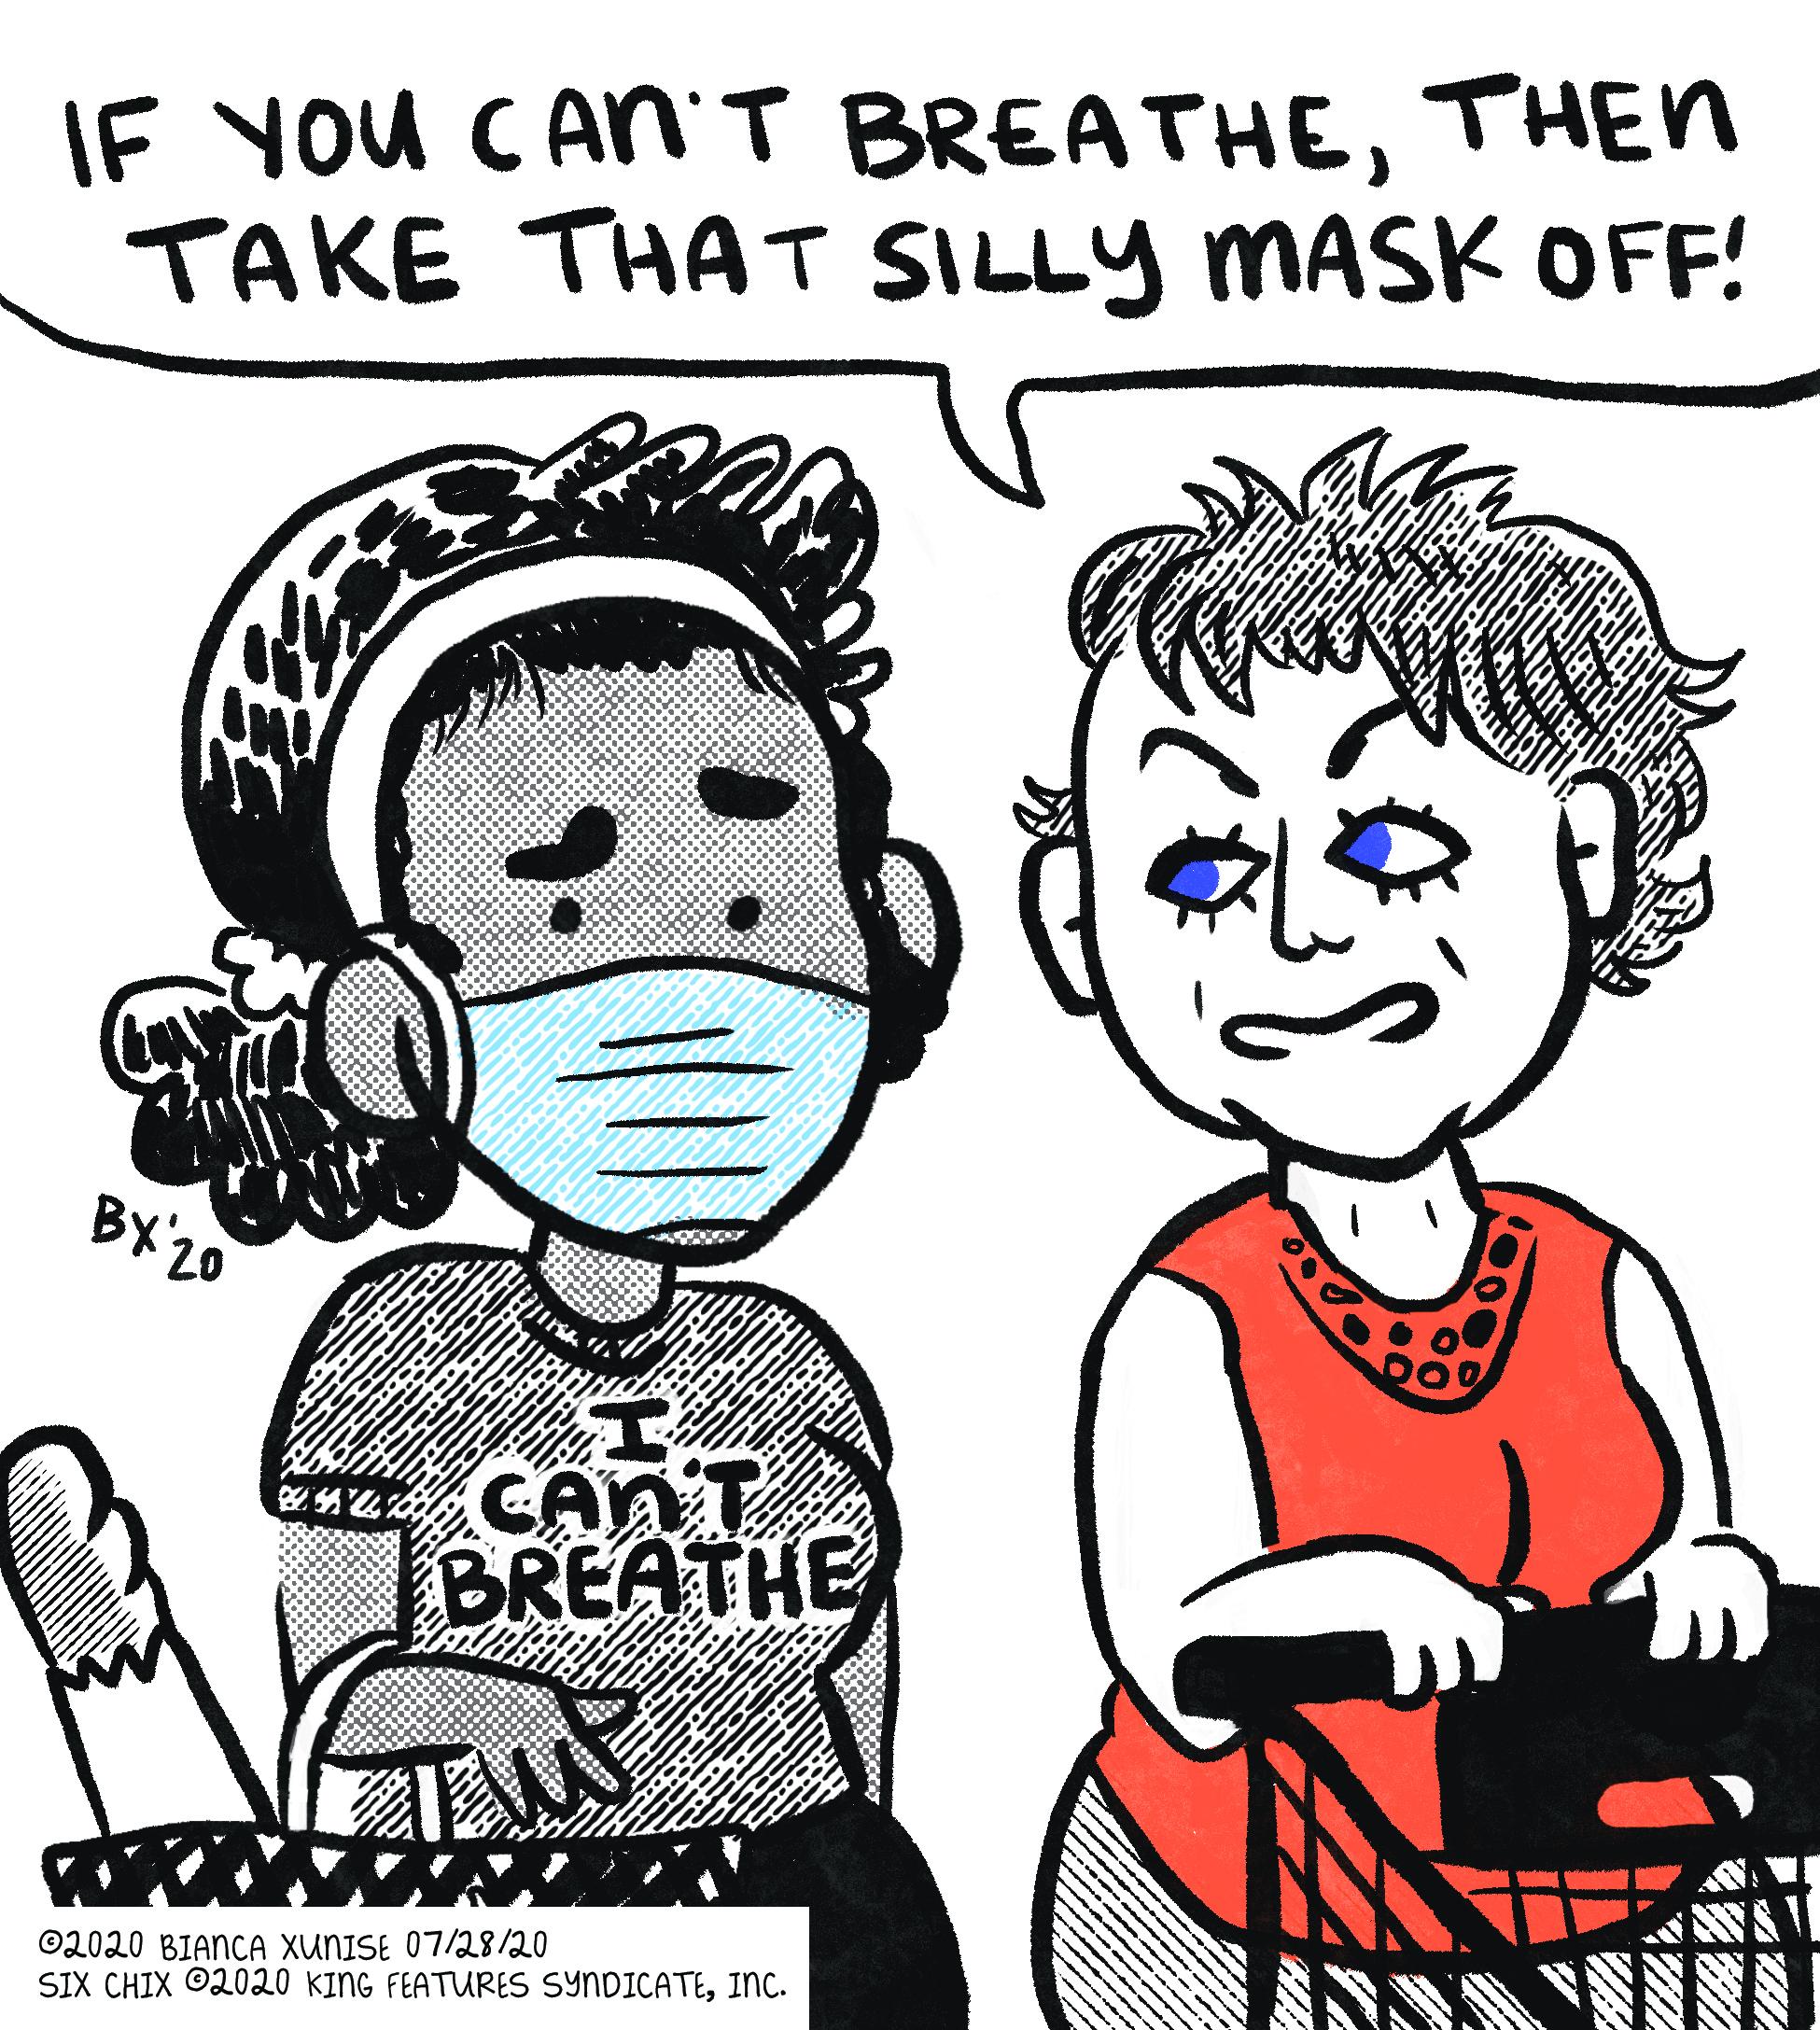 comic depicting a woman wearing a surgical mask (for the COVID-19 pandemic) and a protest shirt reading "I can't breath" \ is harassed by a maskless woman who sneers "If you can't breath than take that silly mask off!"